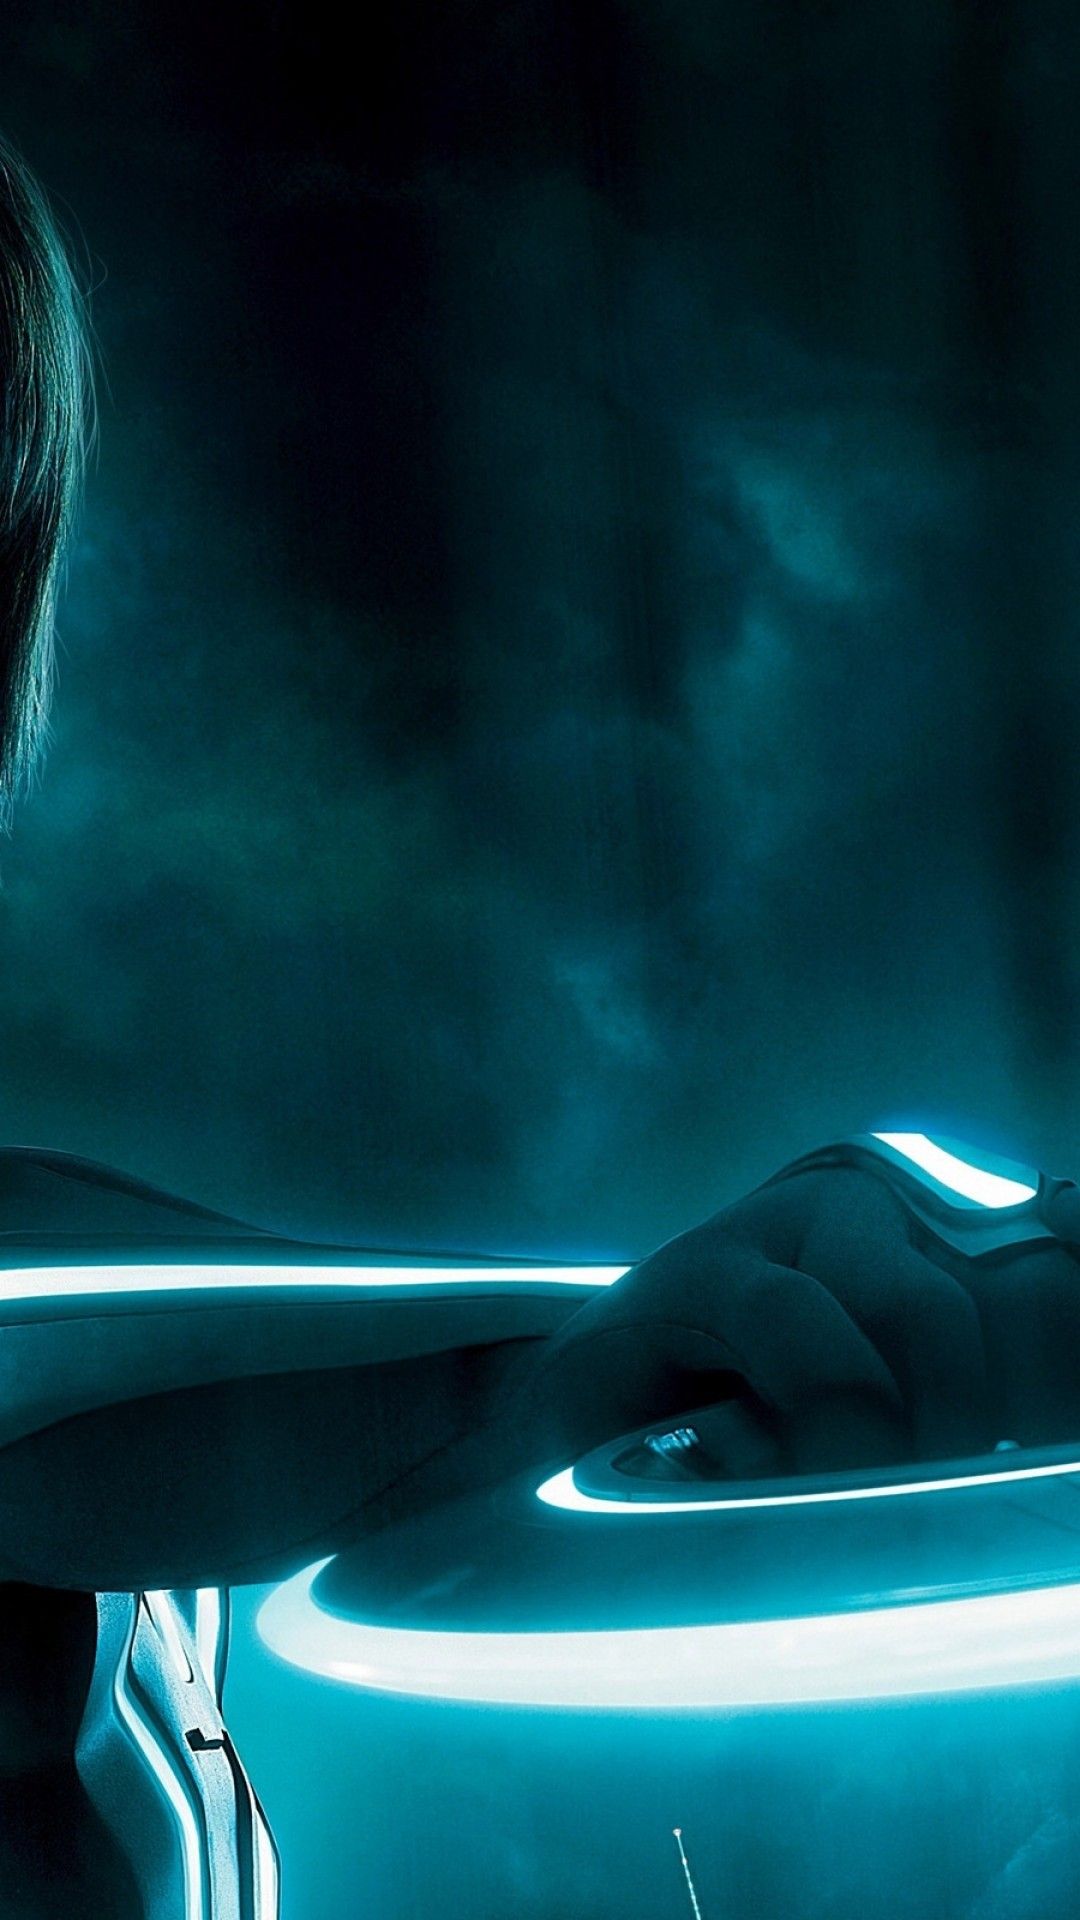 Download 1080x1920 Tron Legacy, Quorra, Olivia Wilde, Bodysuit, Short Hair Wallpaper for iPhone iPhone 7 Plus, iPhone 6+, Sony Xperia Z, HTC One